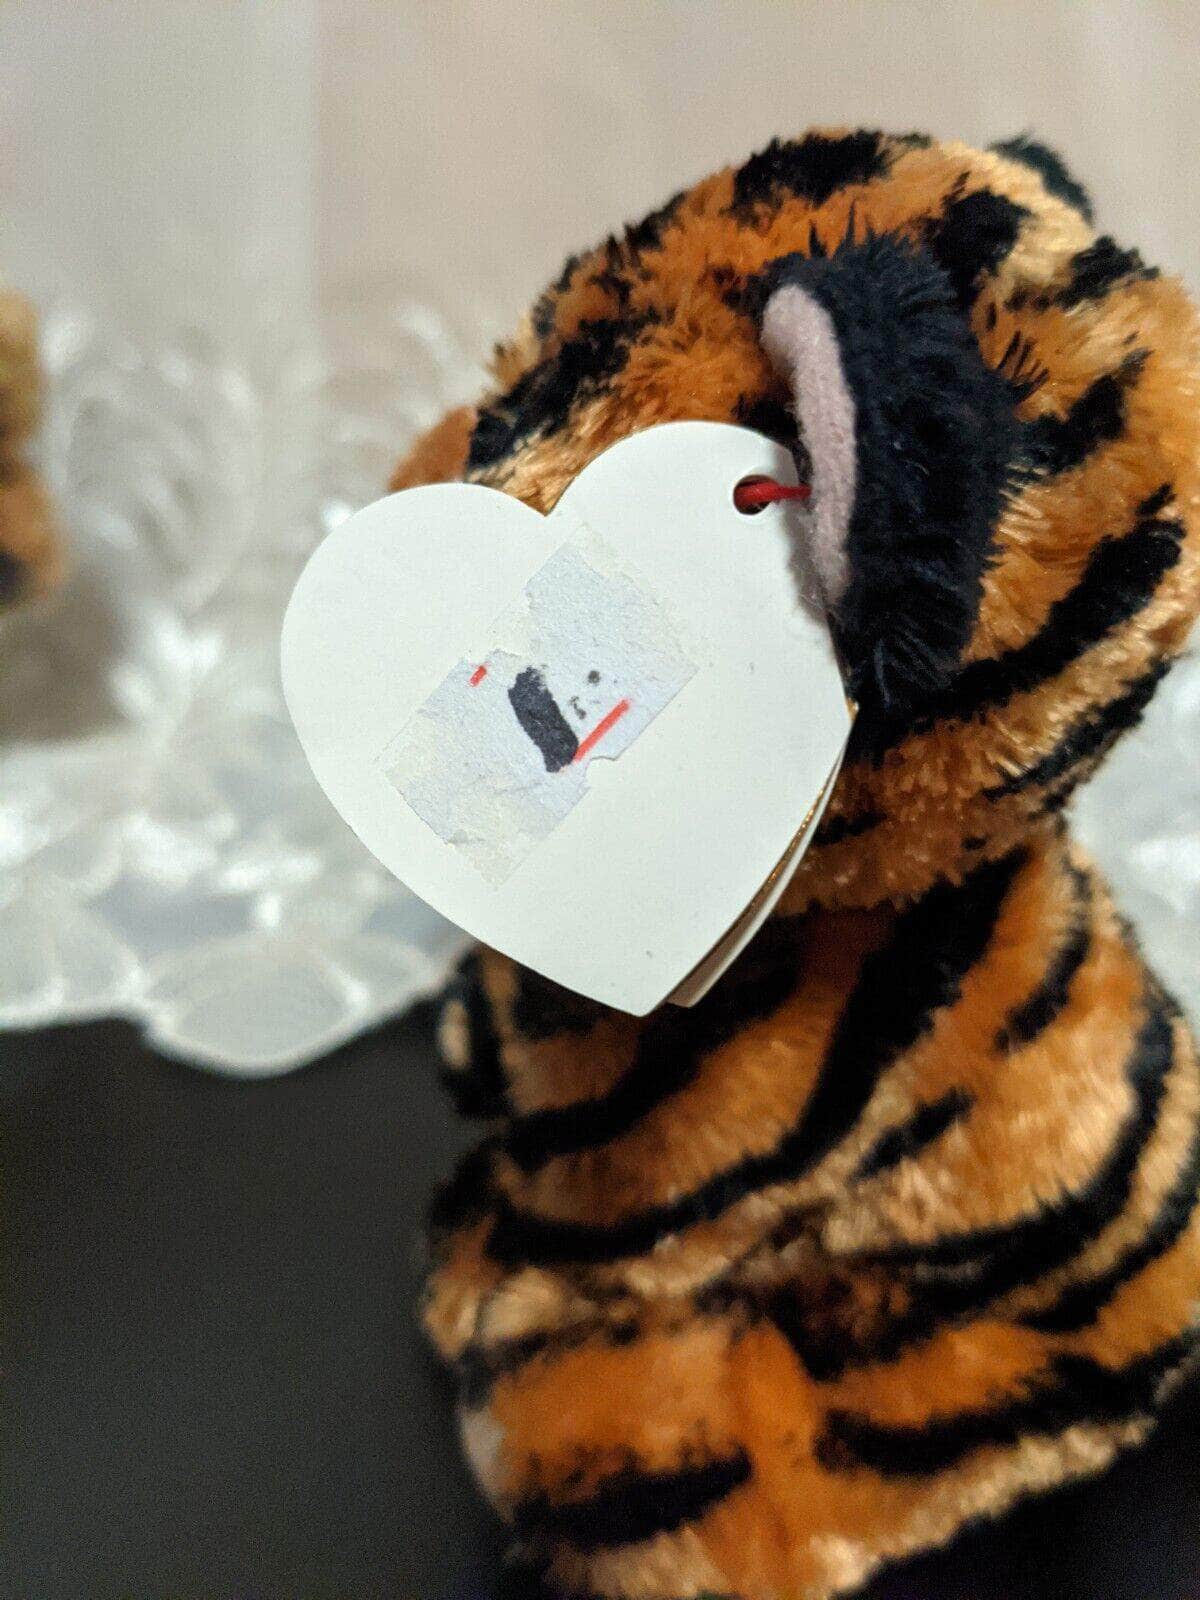 Ty Beanie Baby - Stripers The Tiger (6 In) Near Mint - Vintage Beanies Canada